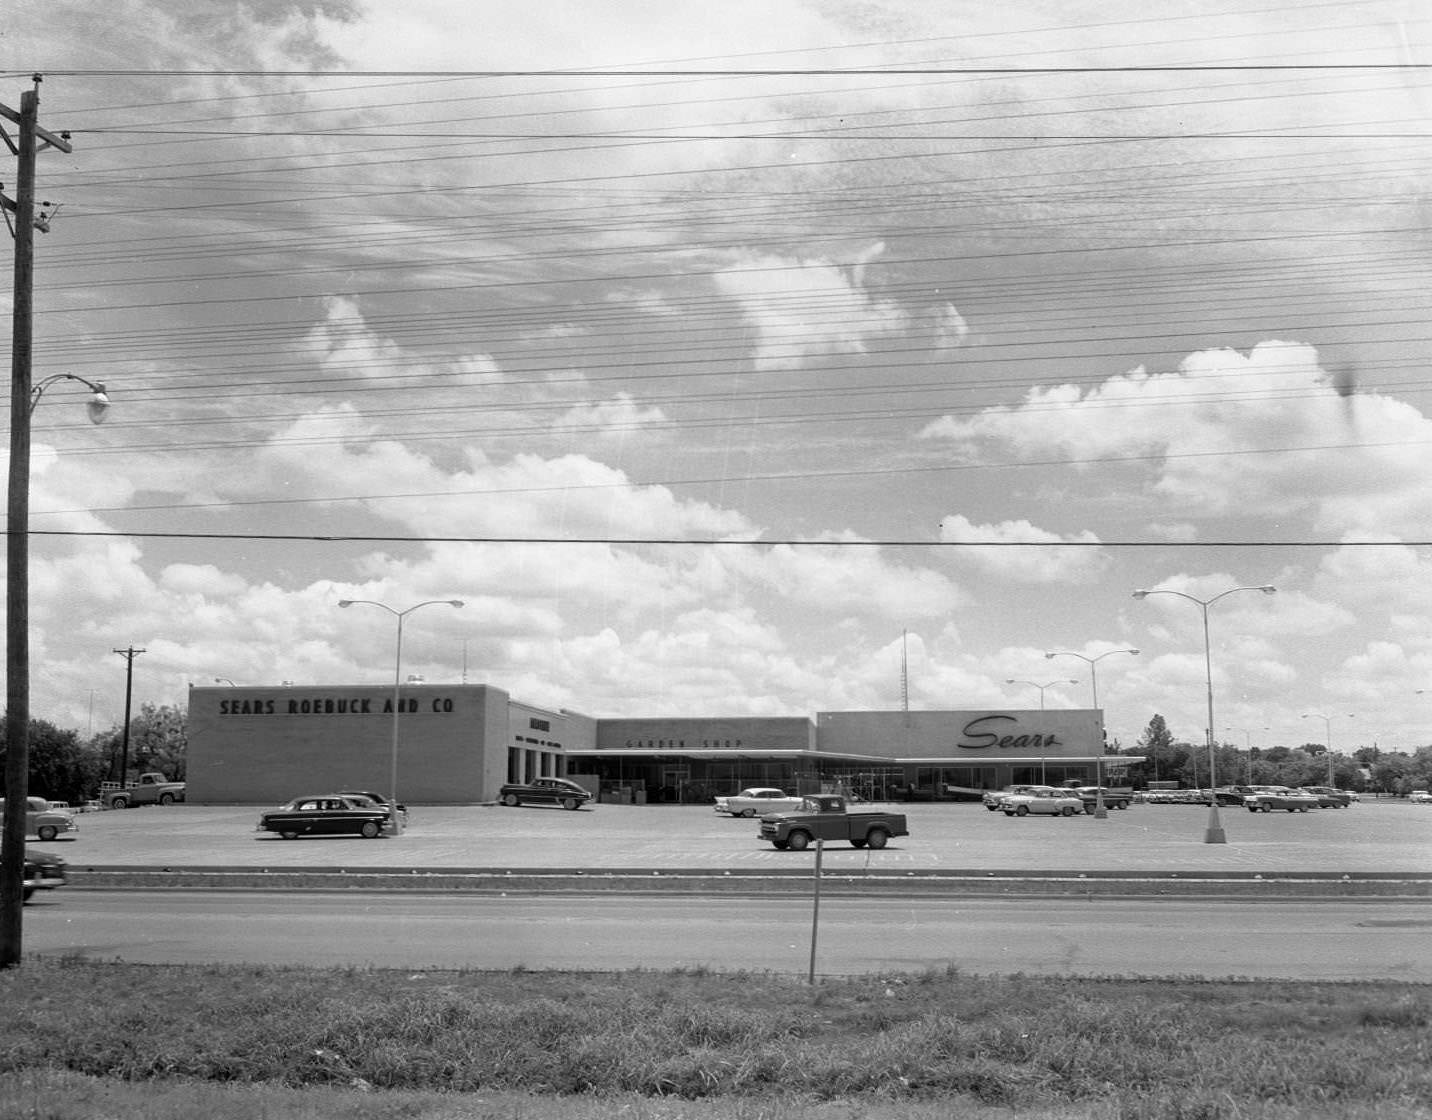 The Sears Roebuck and Co. store on Sayles and S. First Streets in Abilene, 1958